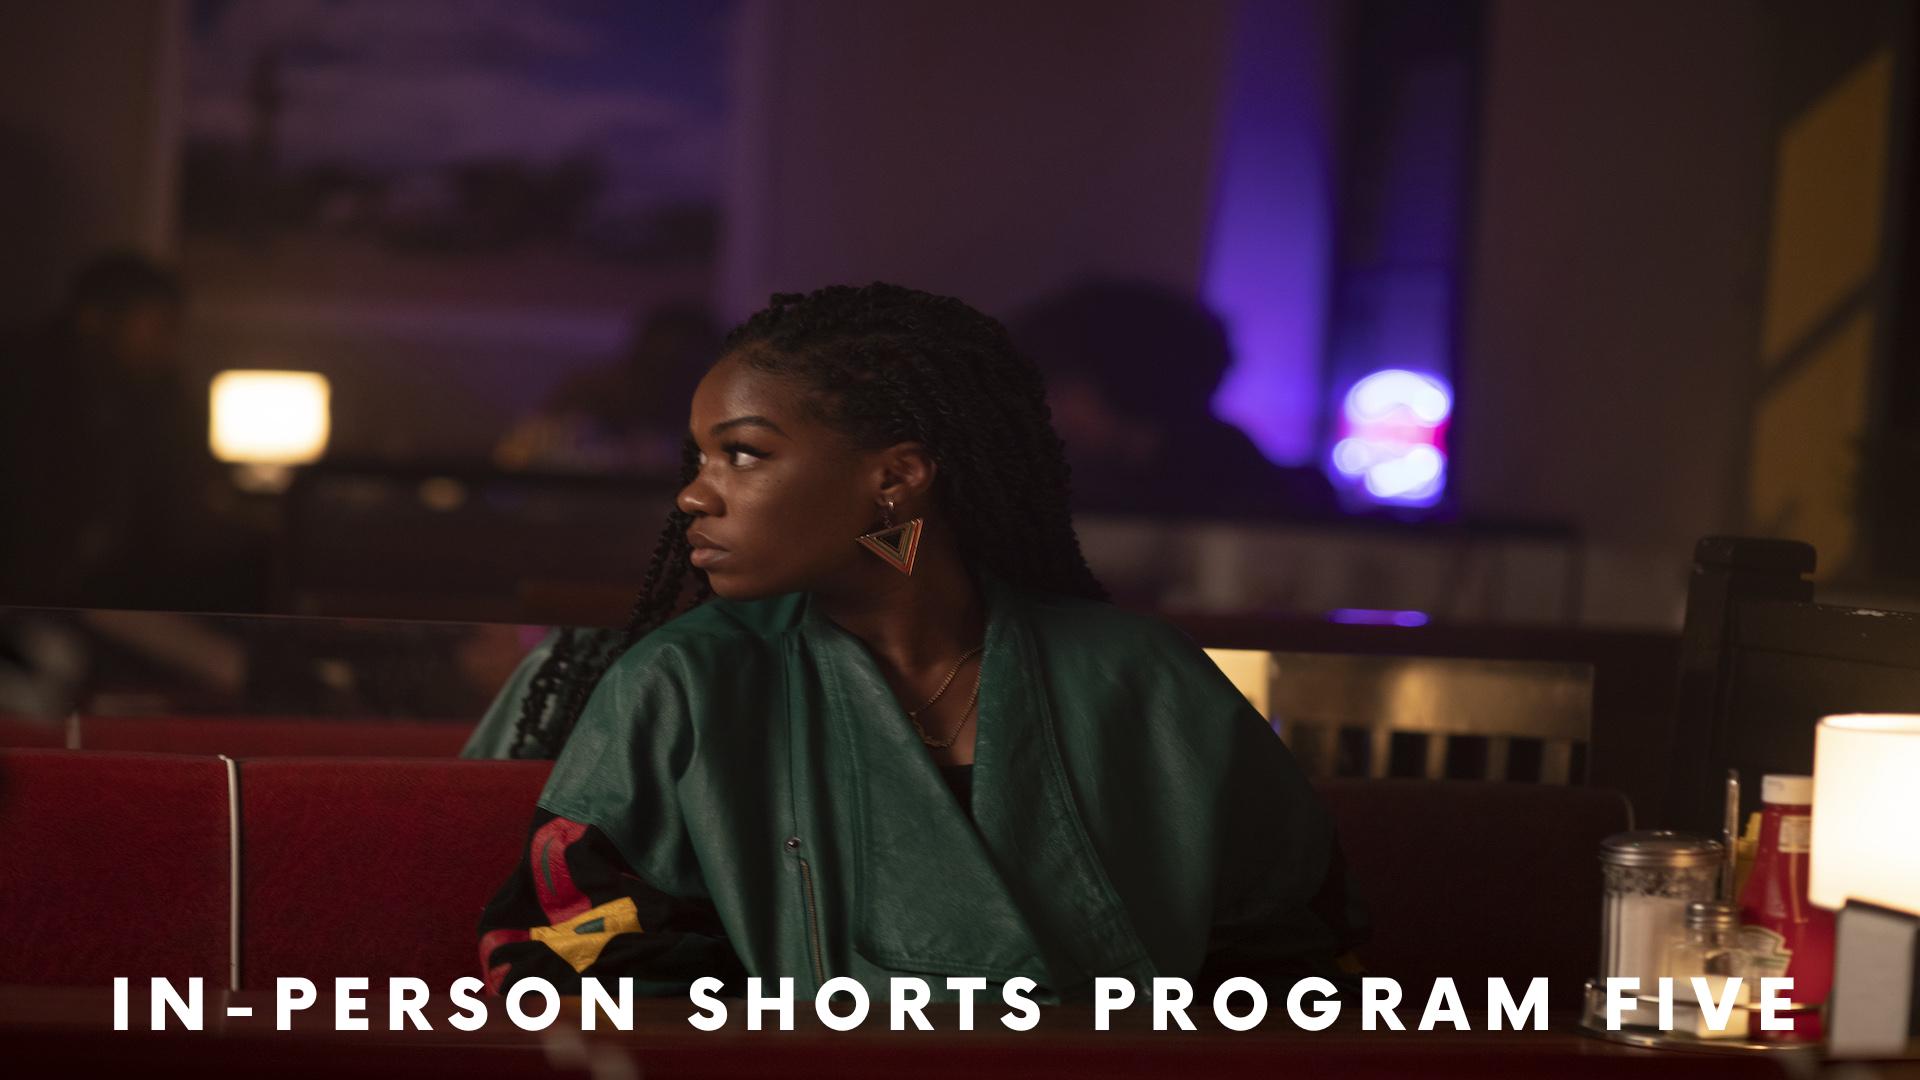 In-Person Shorts Program 5